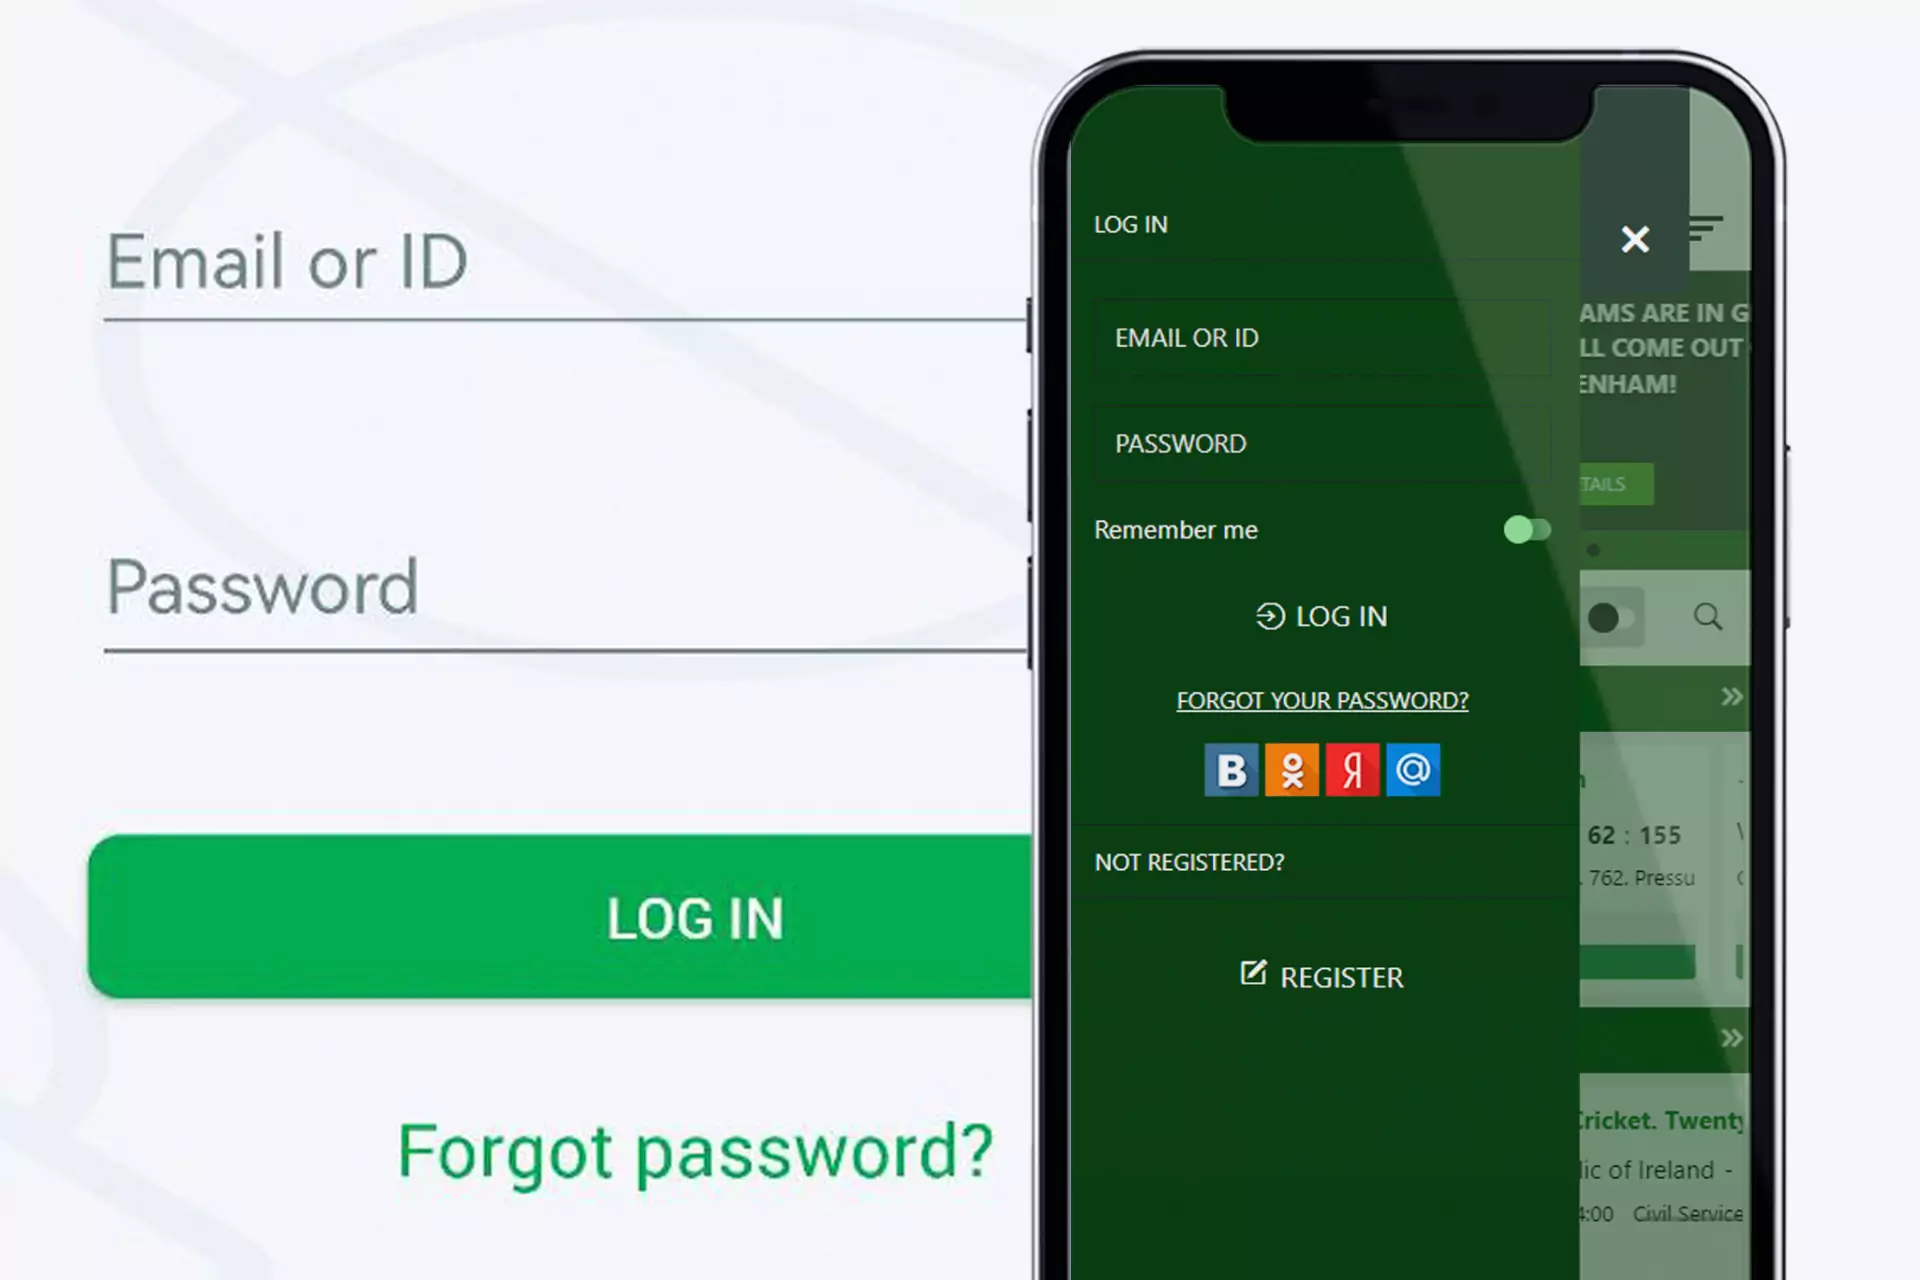 After you register, log in using an ID and a password.